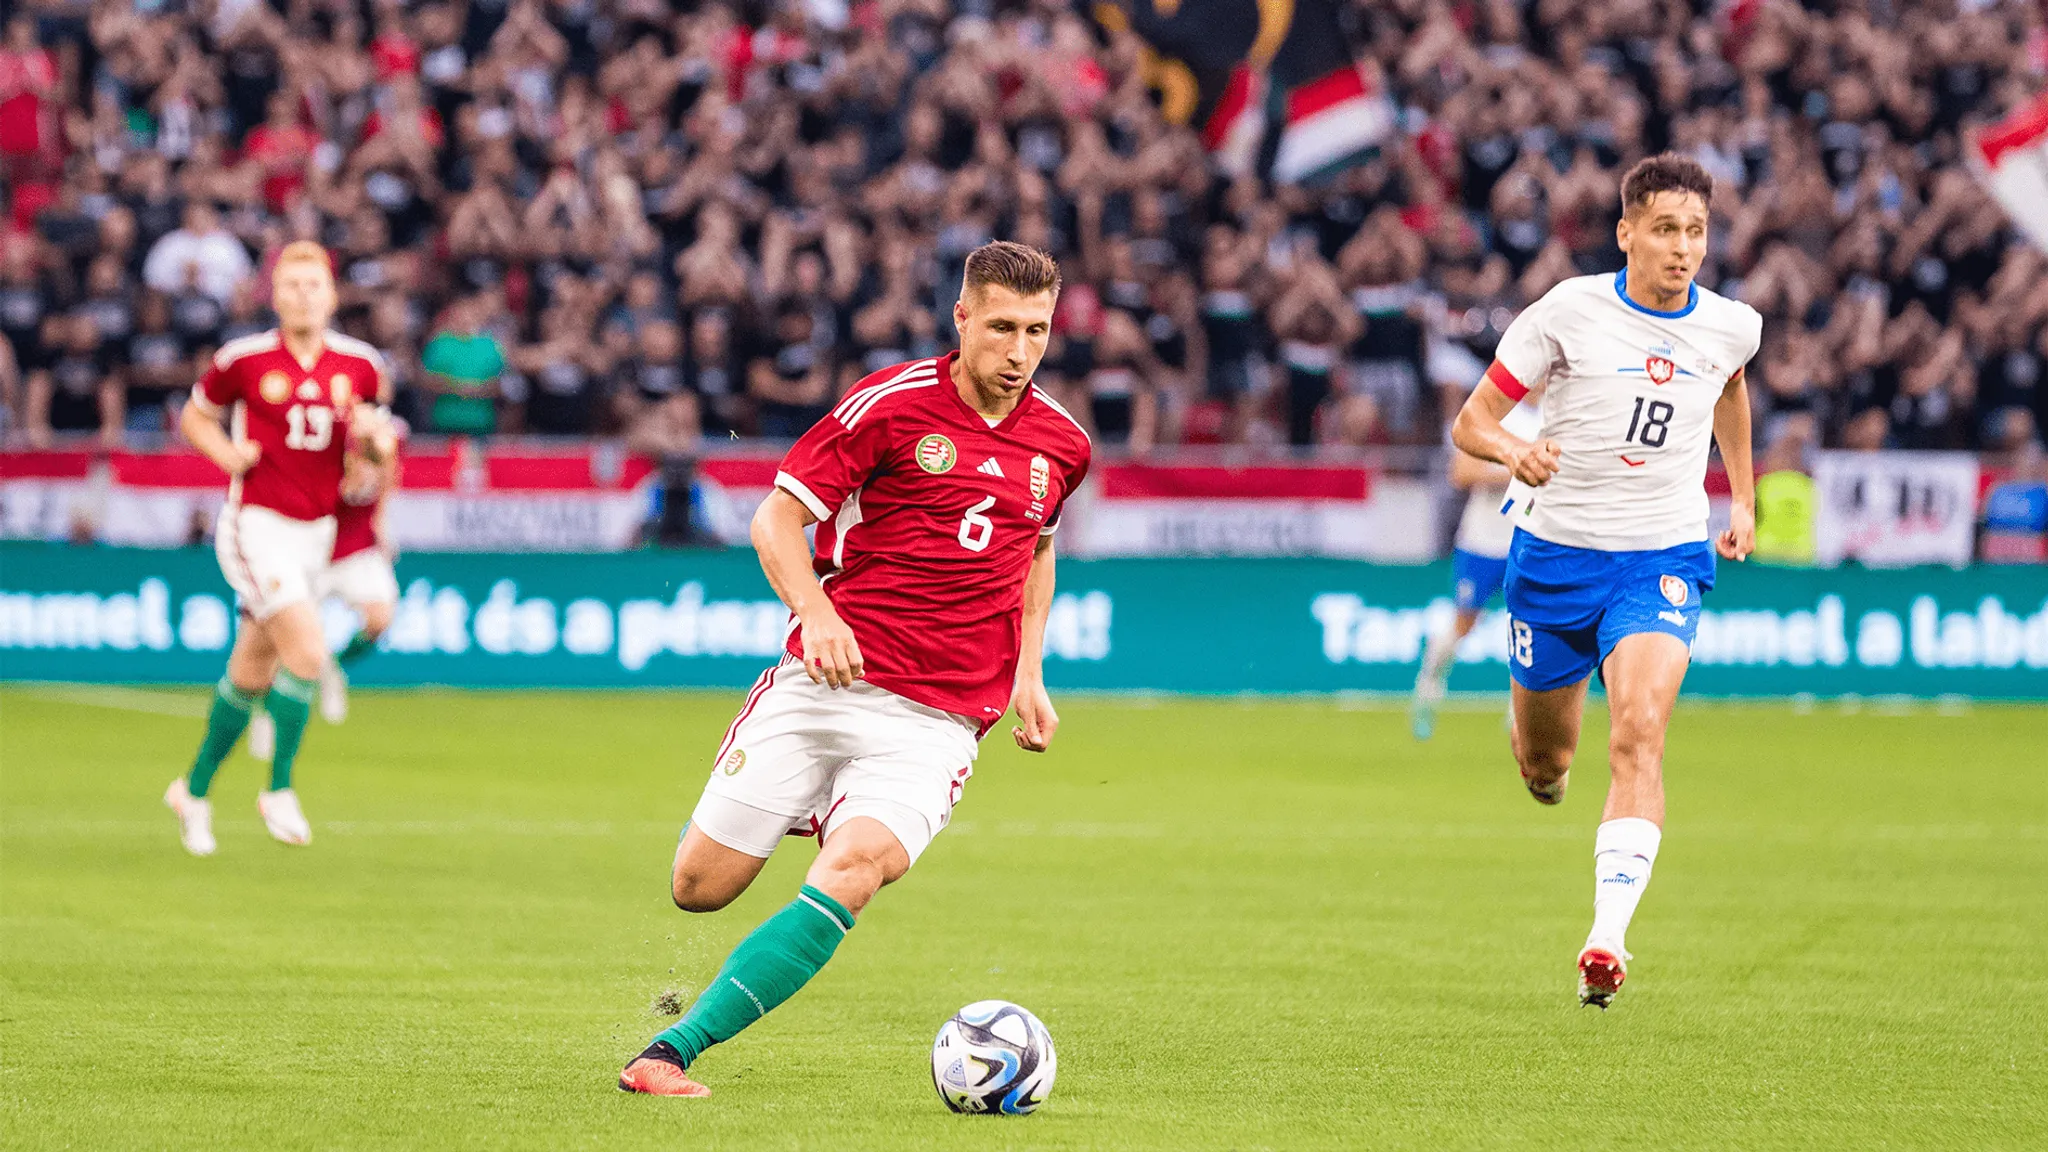 Willi Orban picked up an injury while on international duty with Hungary.